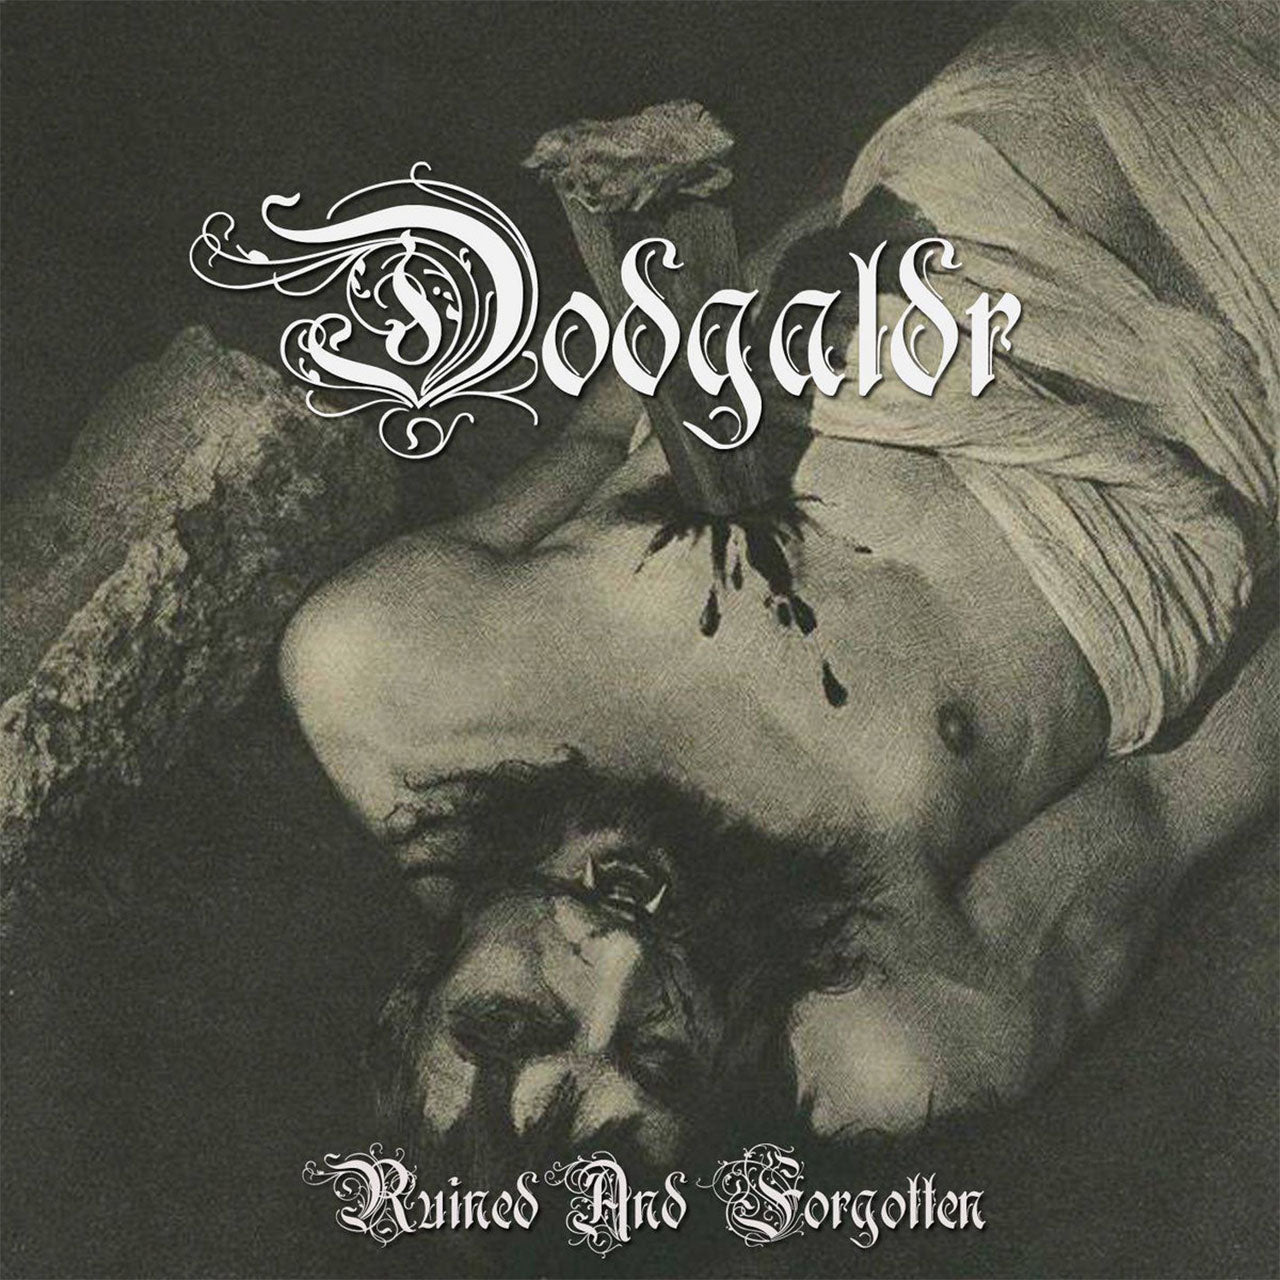 Dodgaldr - Ruined and Forgotten (CD)